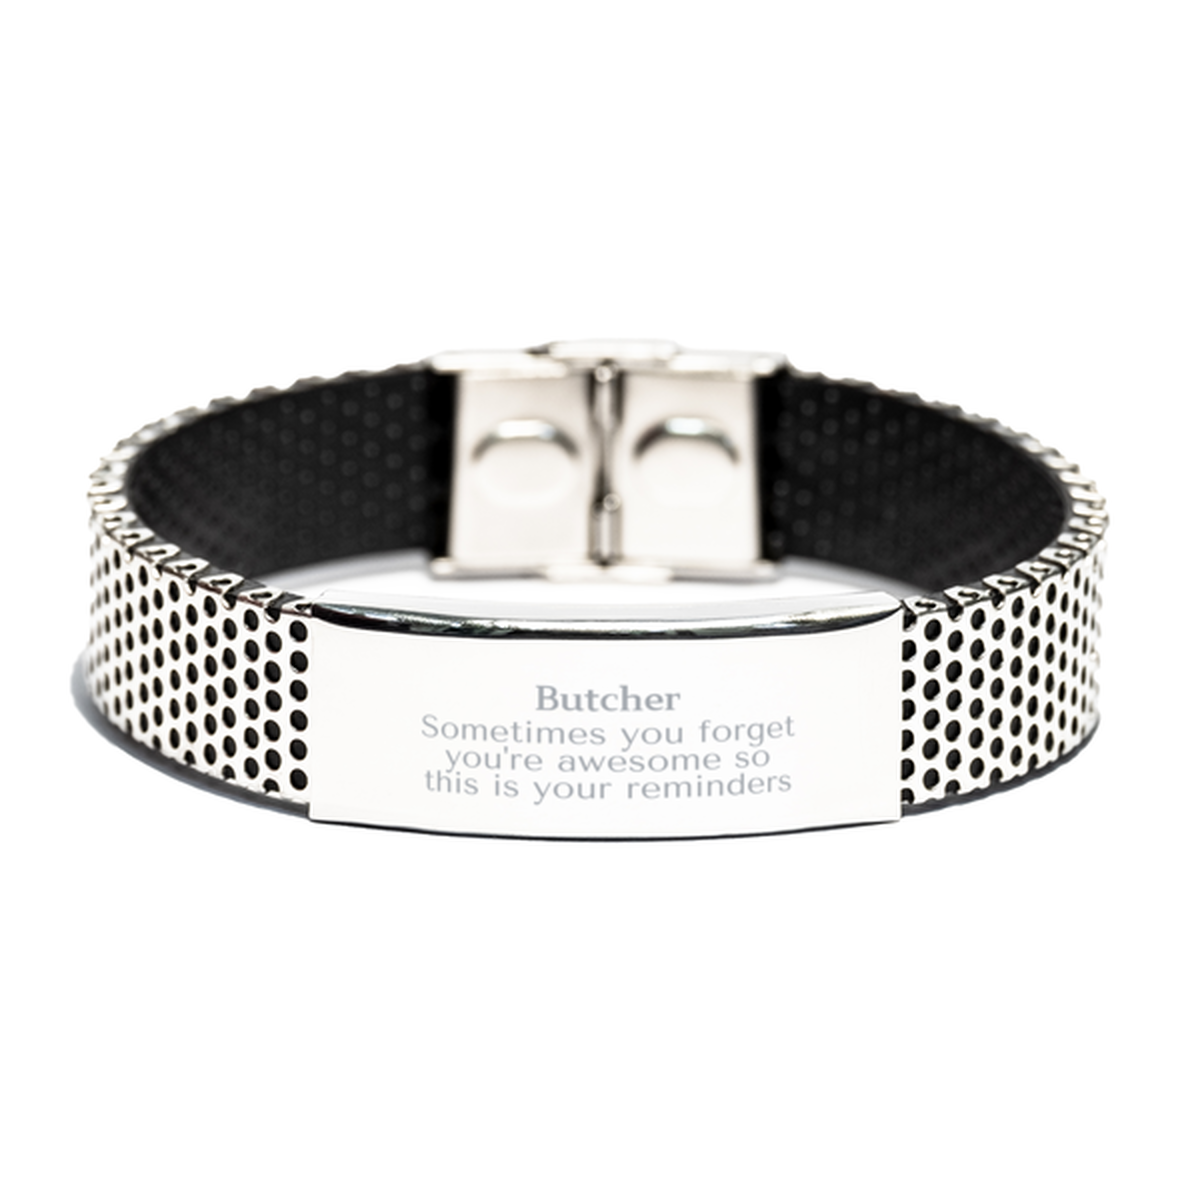 Sentimental Butcher Stainless Steel Bracelet, Butcher Sometimes you forget you're awesome so this is your reminders, Graduation Christmas Birthday Gifts for Butcher, Men, Women, Coworkers